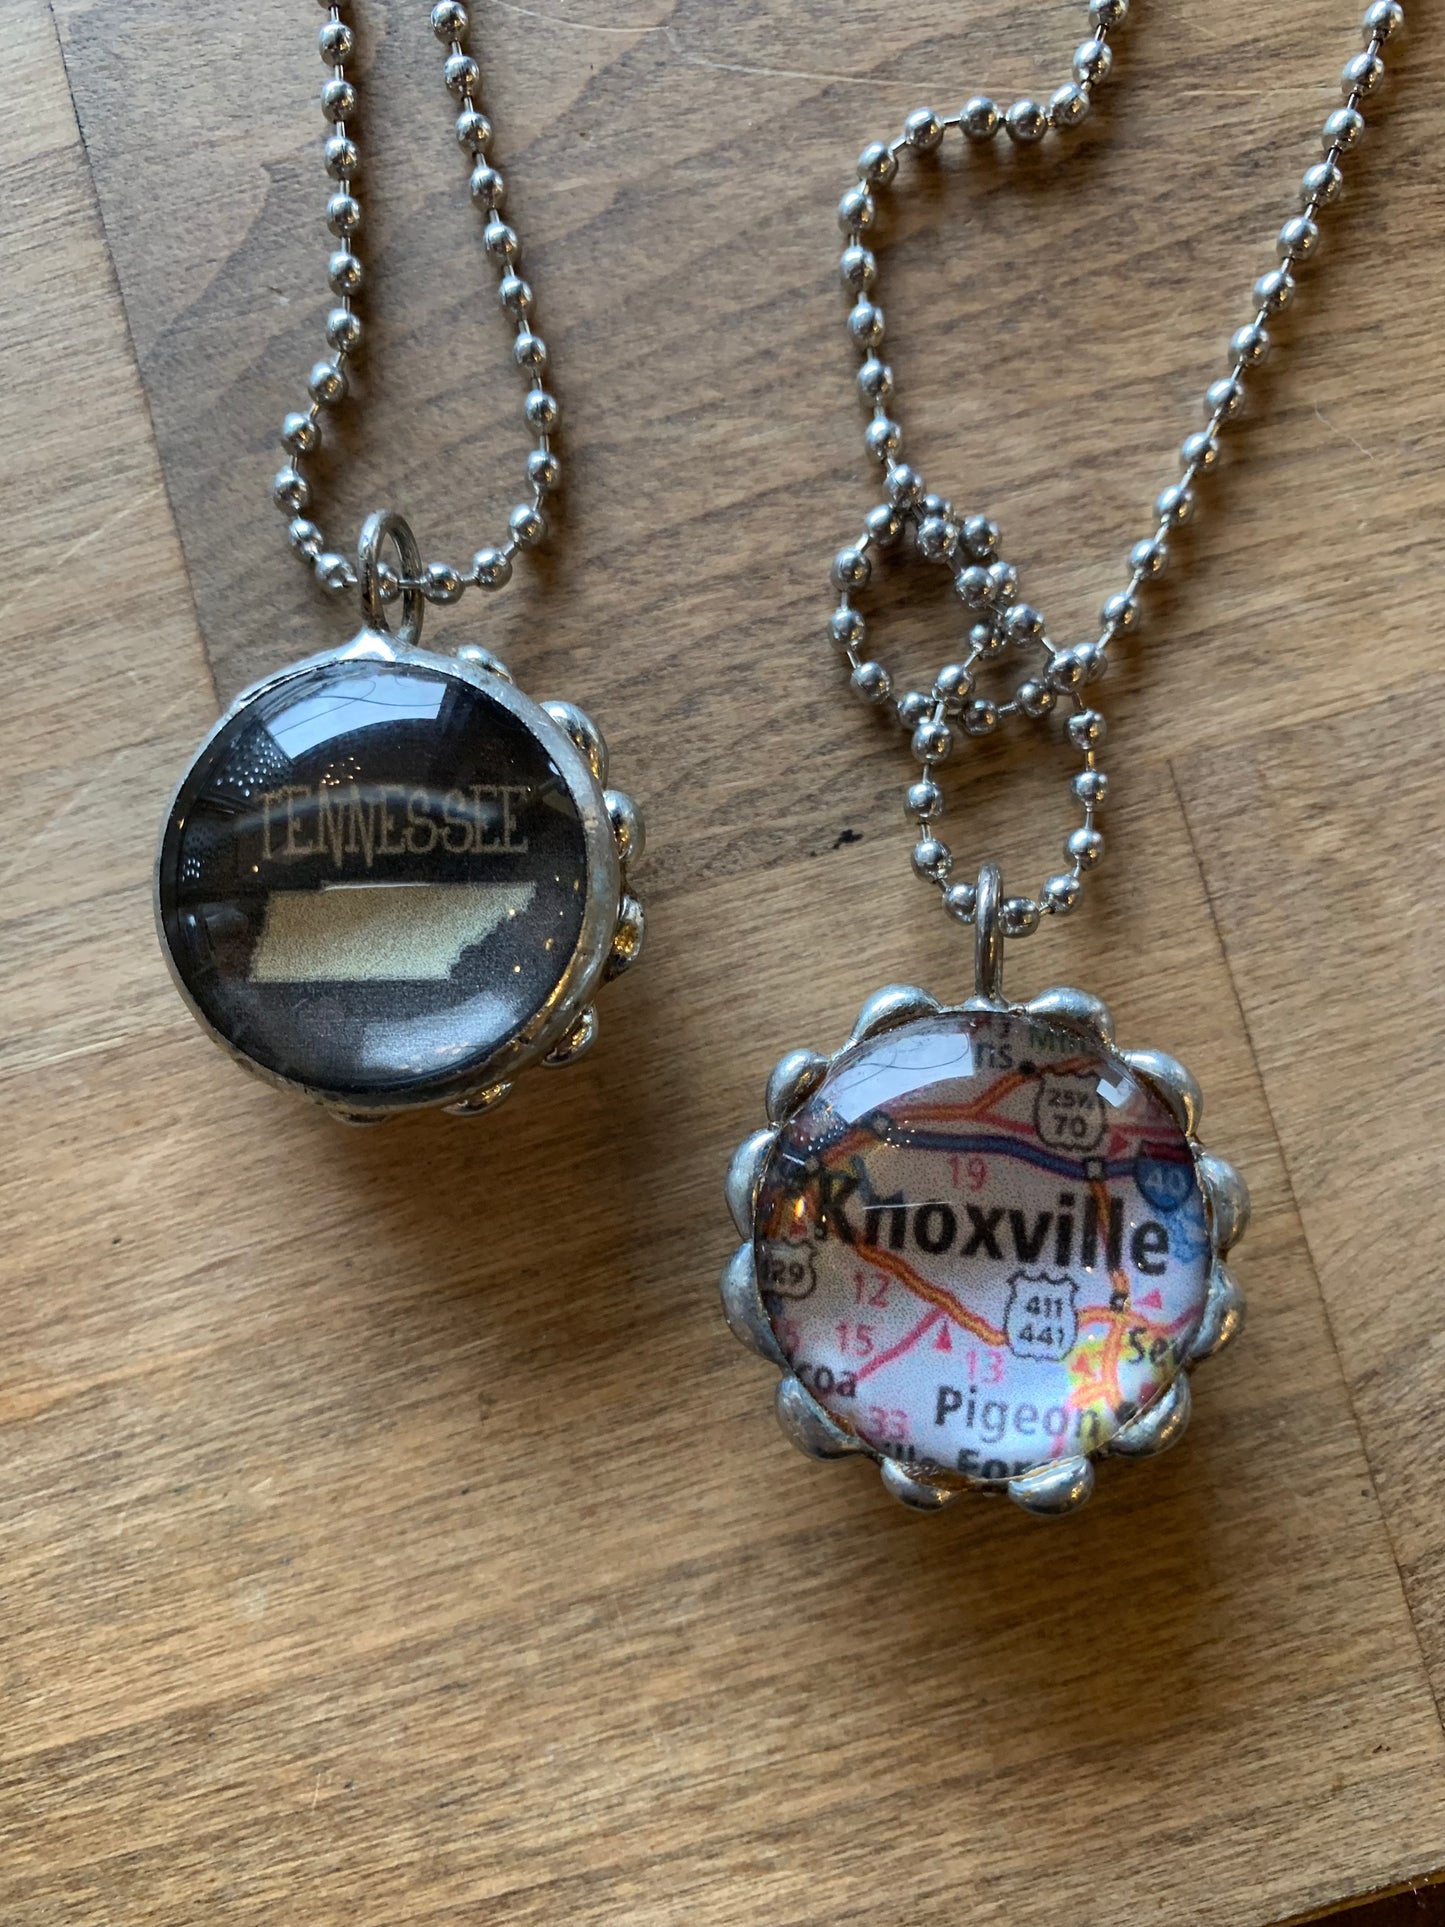 * Knoxville Map Ball and Chain Necklace